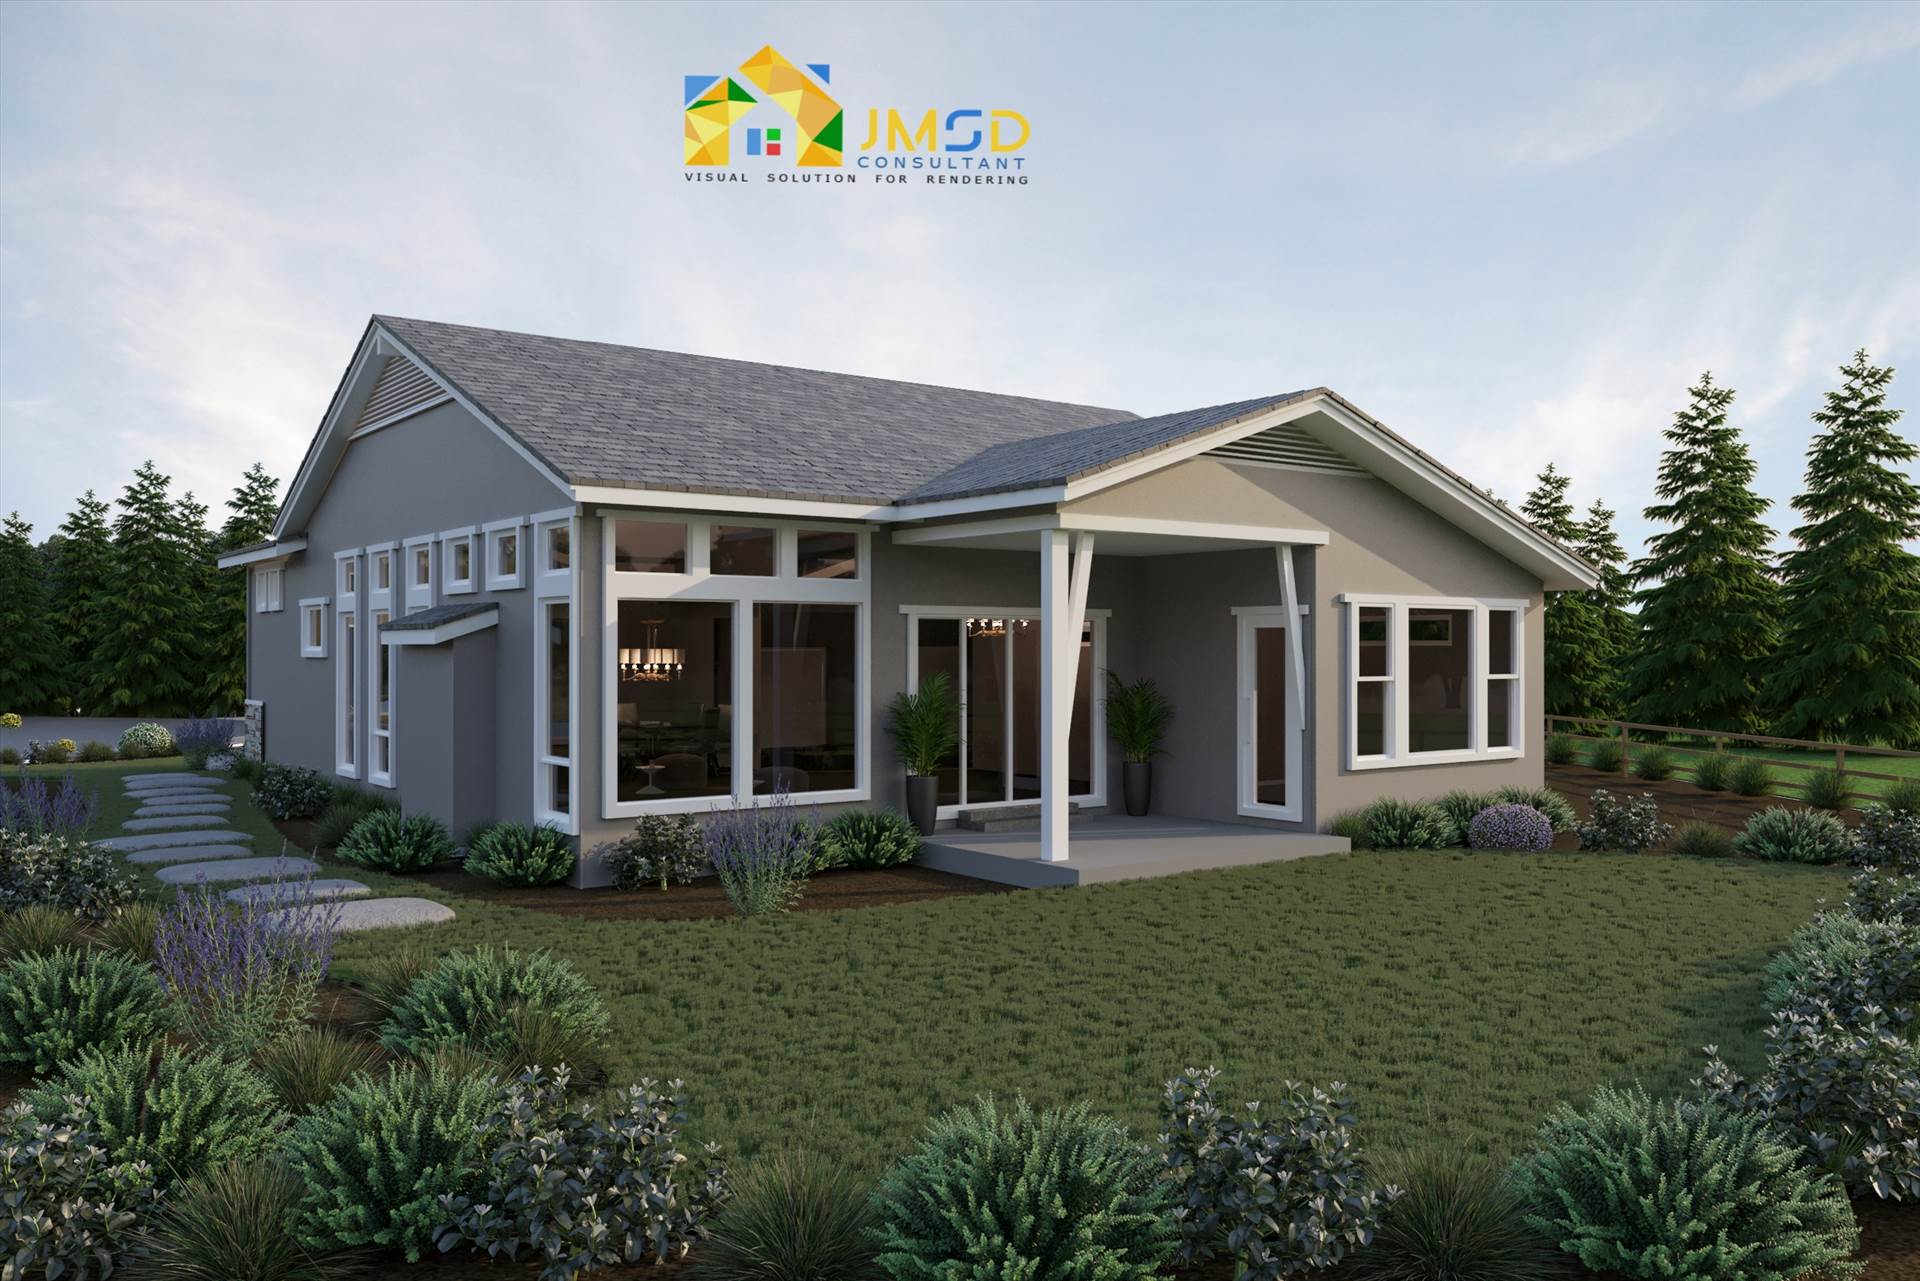 3D Exterior Home Rendering Services Hartford Connecticut Looking for Architectural Visualization and 3D Rendering Services Hartford Connecticut? We providing Architectural 3D Rendering Services for Residential as well as Commercial Rendering Project at best prices in Hartford Connecticut.  by JMSDCONSULTANT